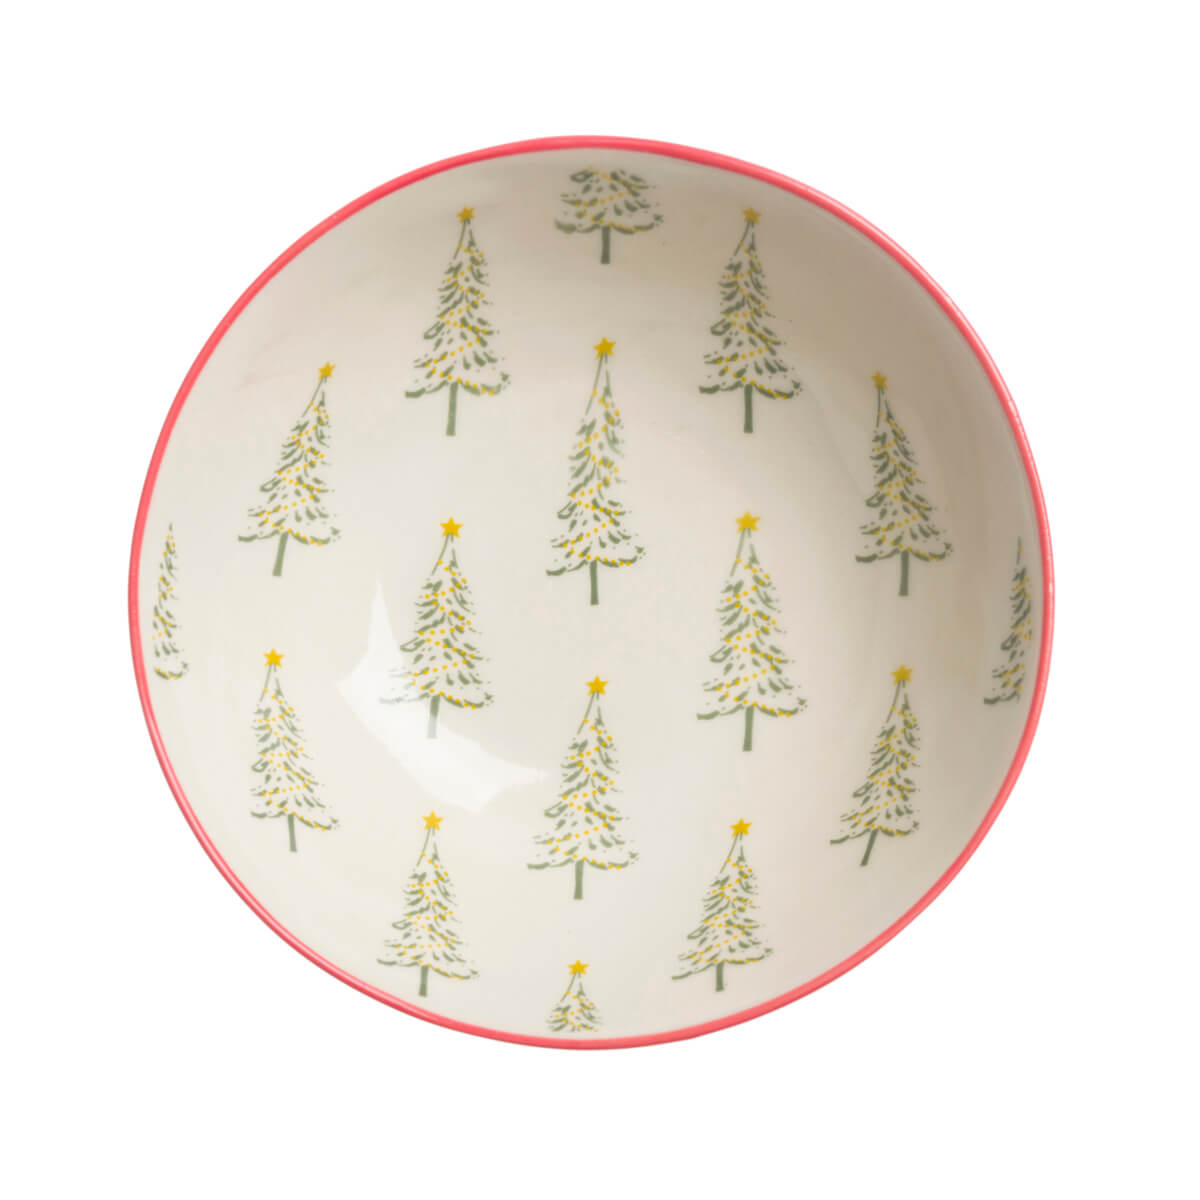 Christmas Tree Stoneware Nibbles Bowl by Sophie Allport